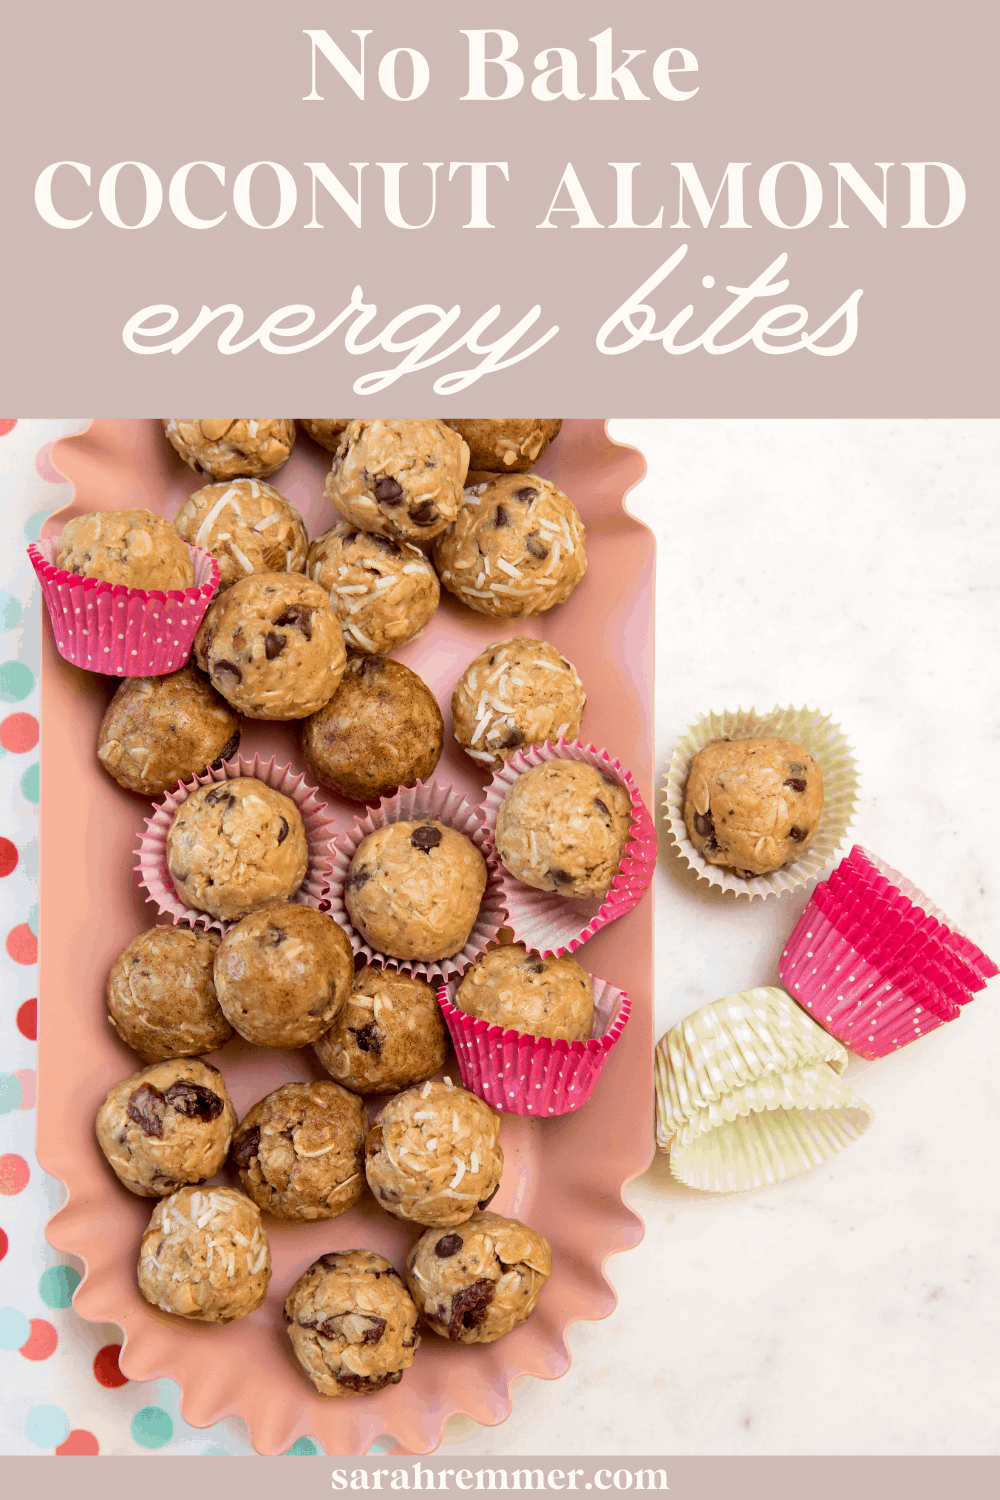 This incredibly easy coconut almond energy bites recipe is packed full of nutrition and kid-approved! You’ll see that it will become a go-to snack in your house.